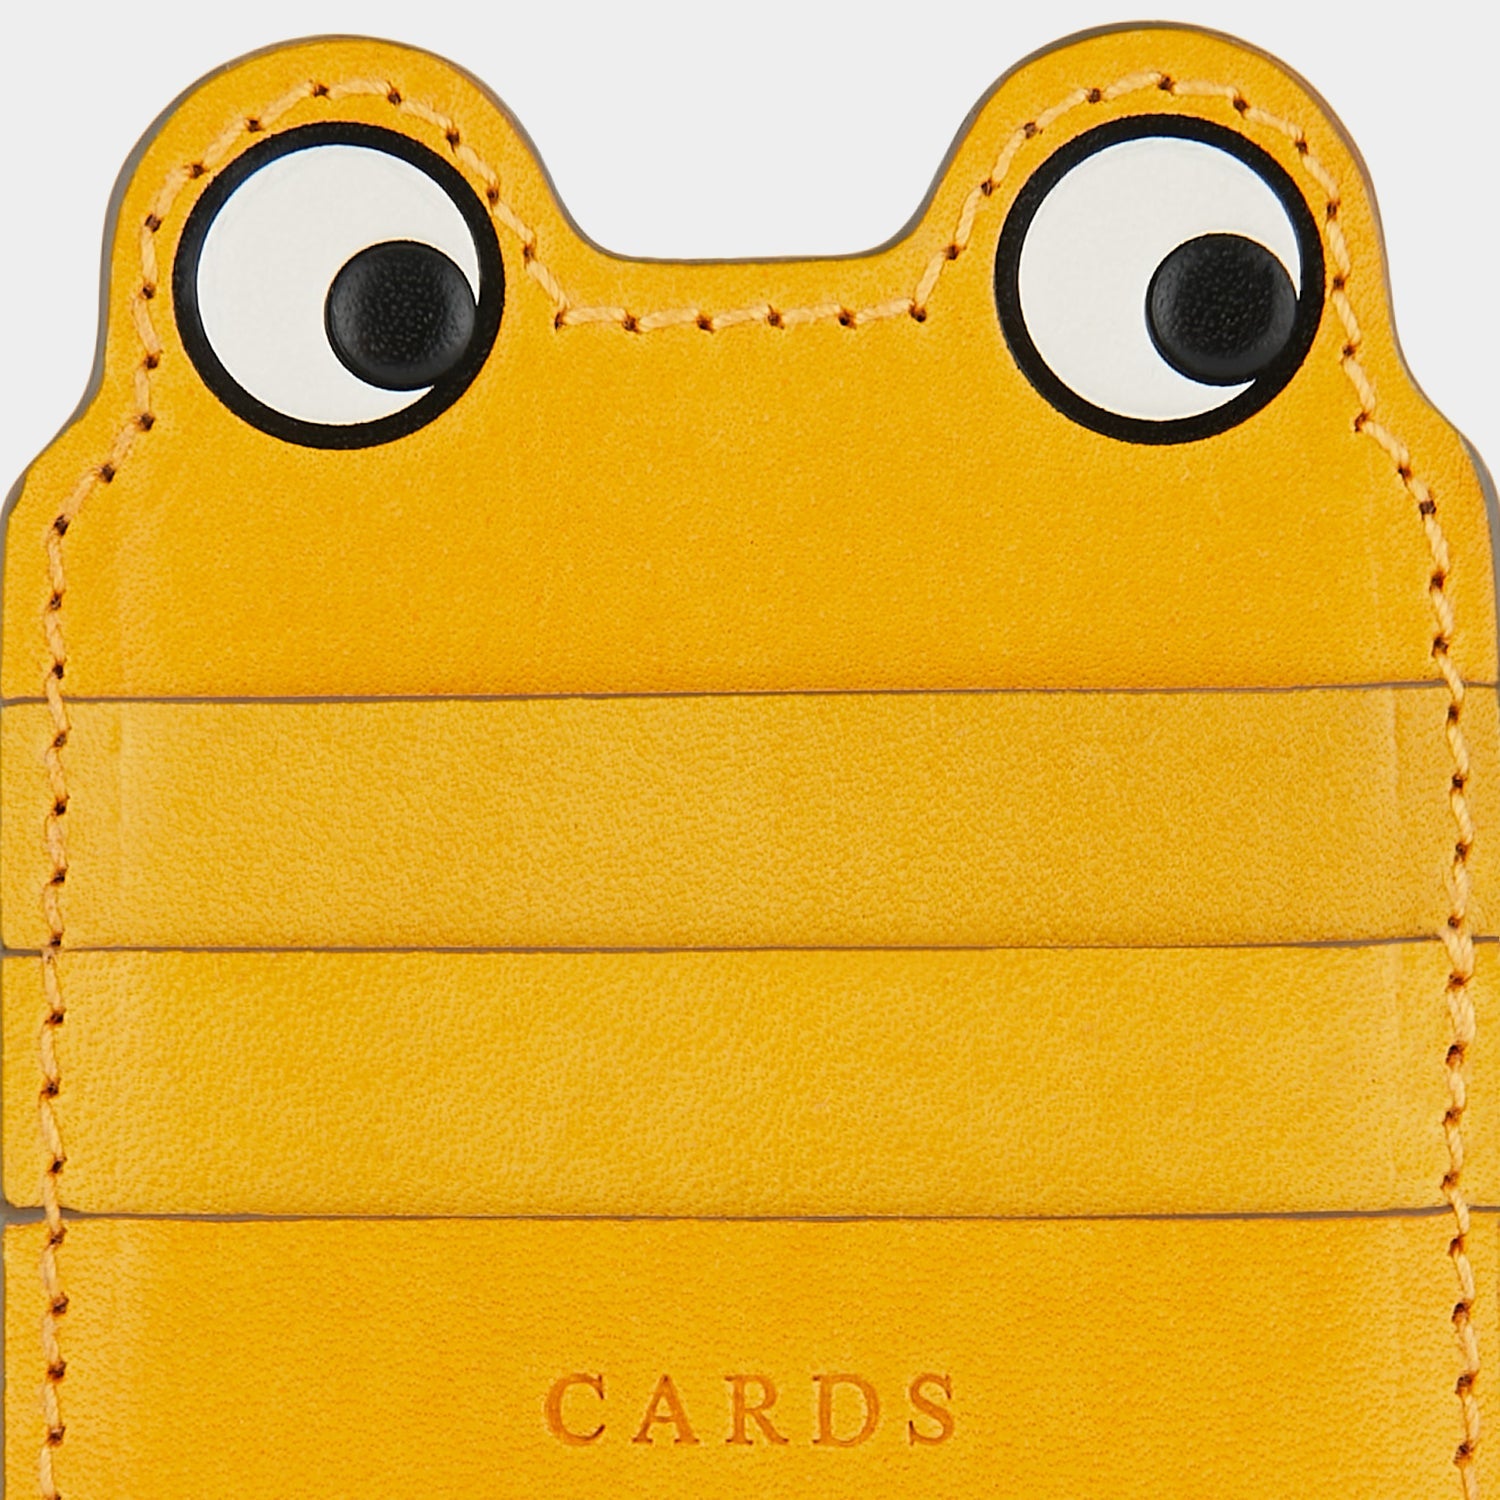 Return to Nature Frog Card Case -

                  
                    Compostable Leather in Honey -
                  

                  Anya Hindmarch EU
